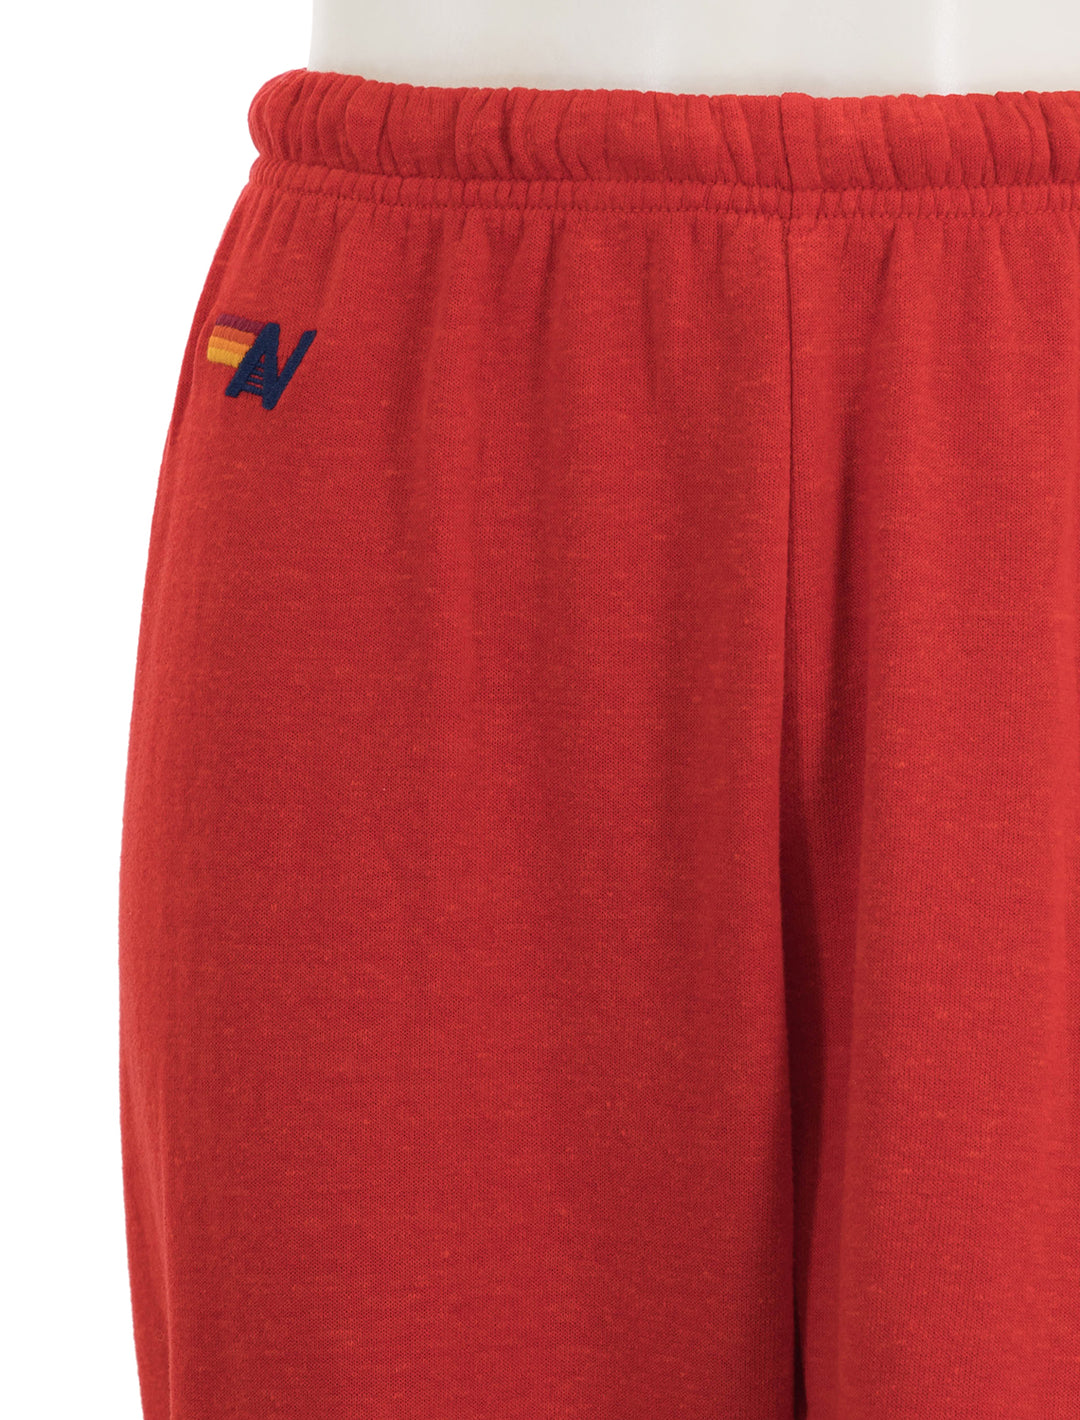 Close-up view of Aviator Nation's bolt - womens sweatpants in red and white.